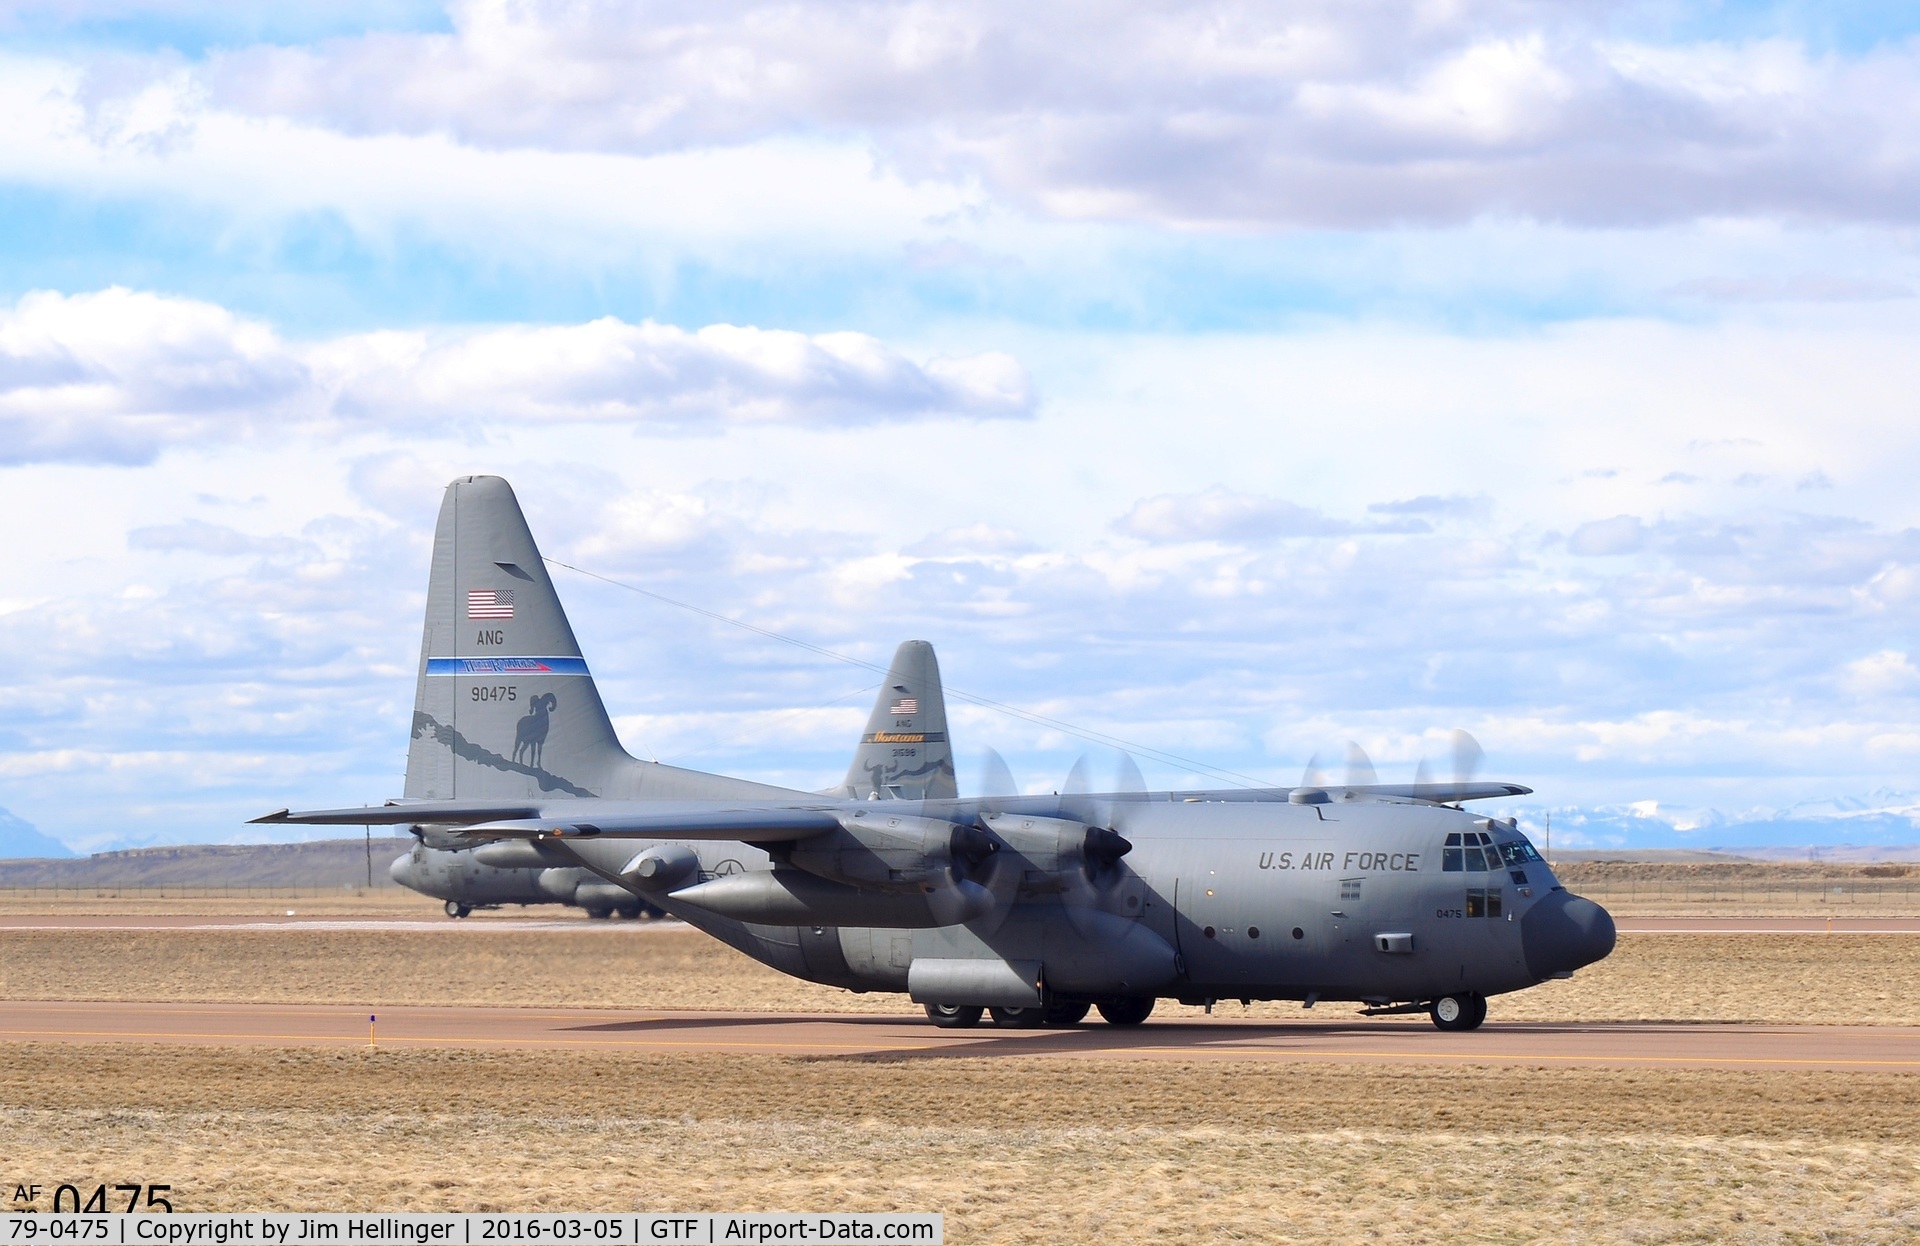 79-0475, 1979 Lockheed C-130H Hercules C/N 382-4855, 0475 flying with the 120th AW.